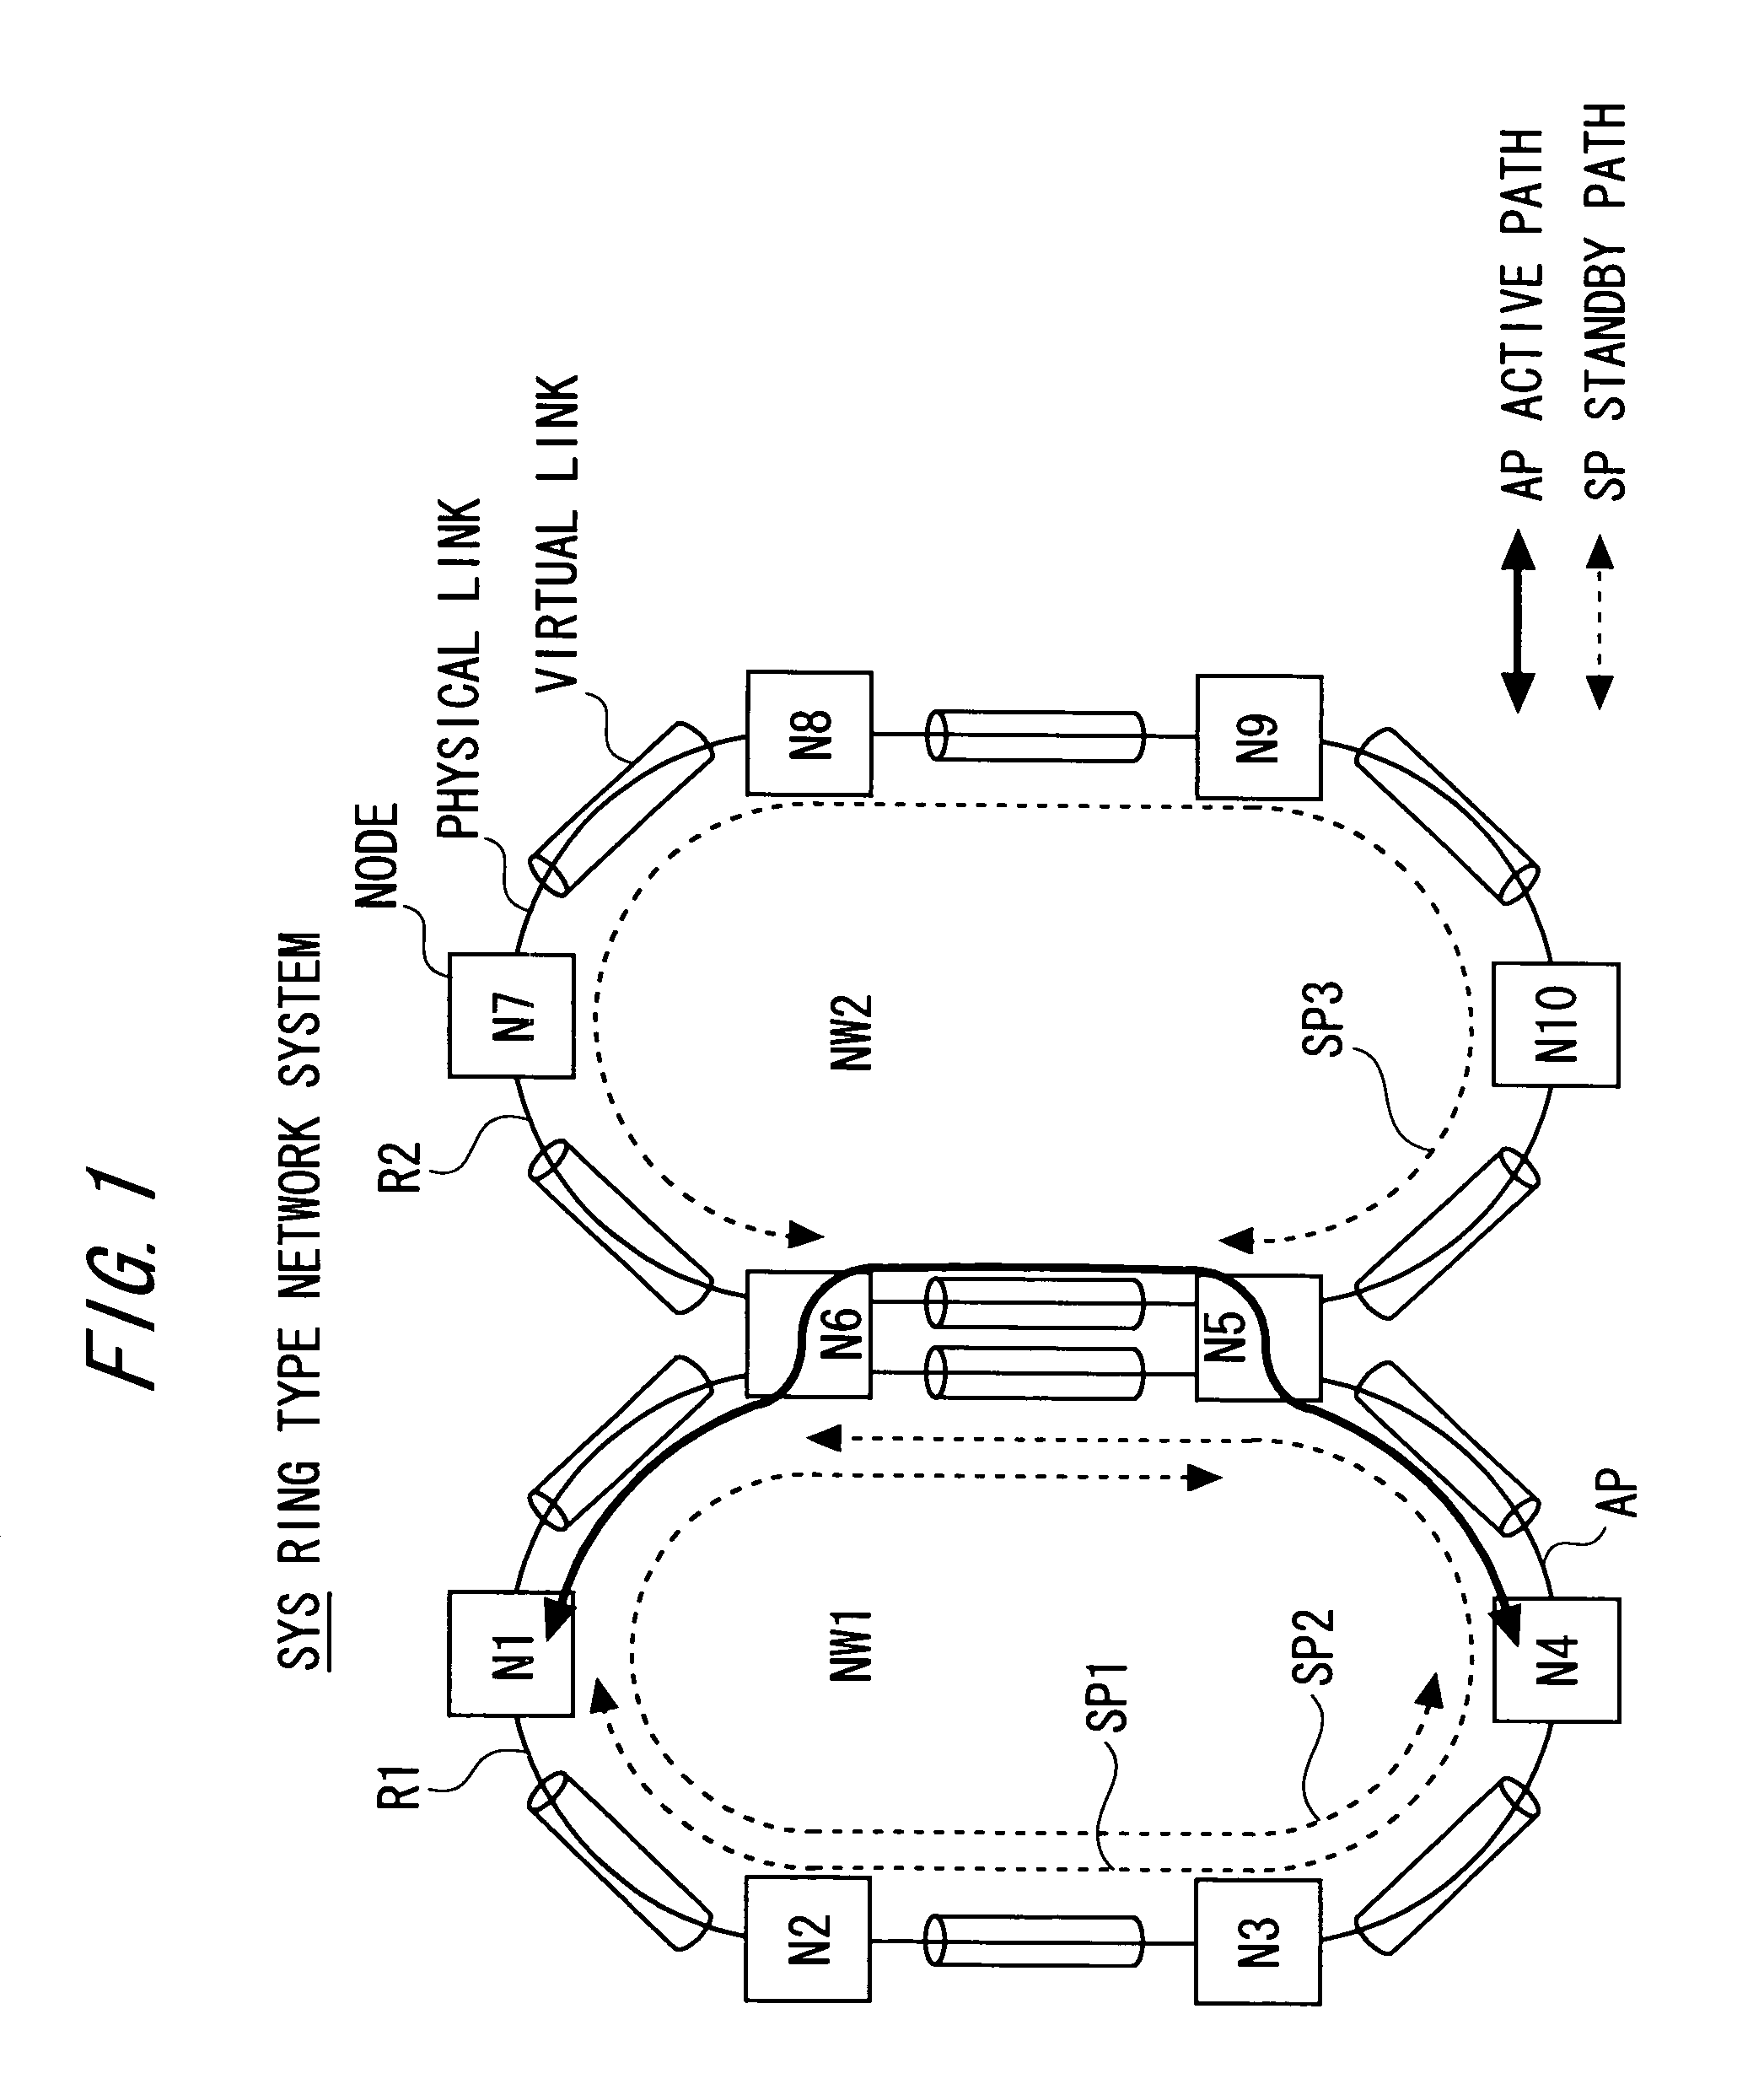 Ring type network system including a function of setting up a path